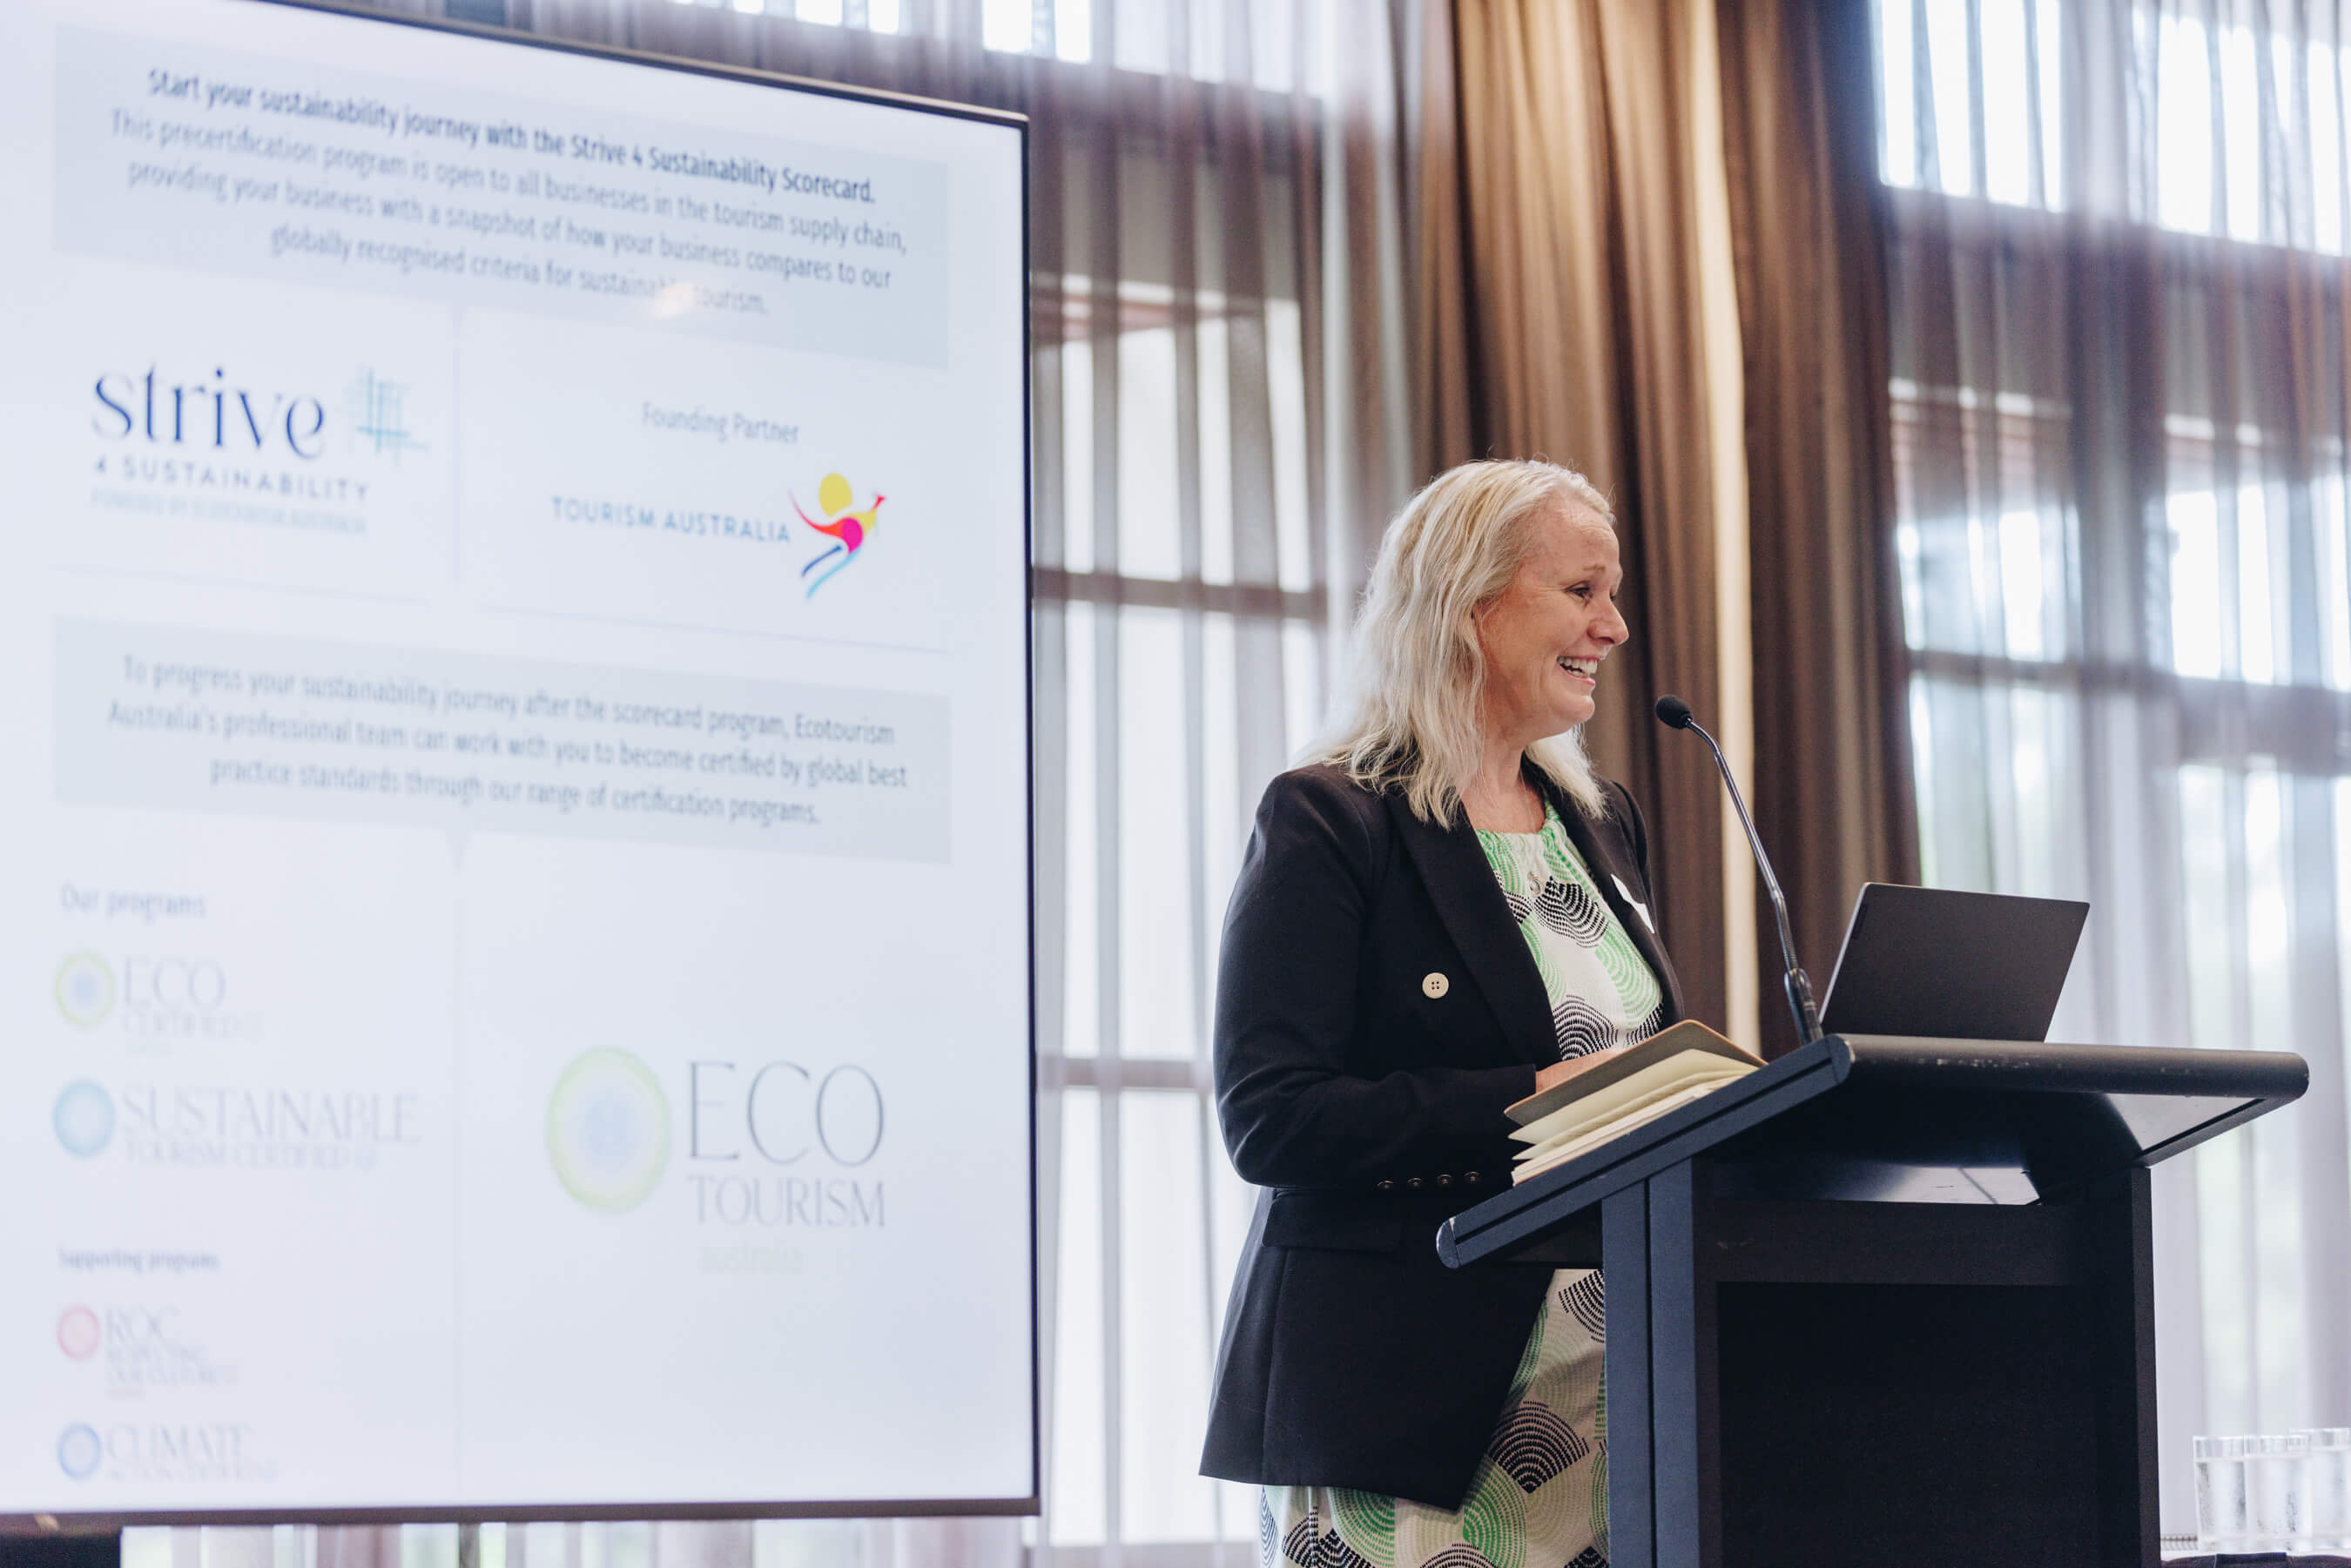 the ceo of ecotourism australia presenting a new sustainable program at lecturn